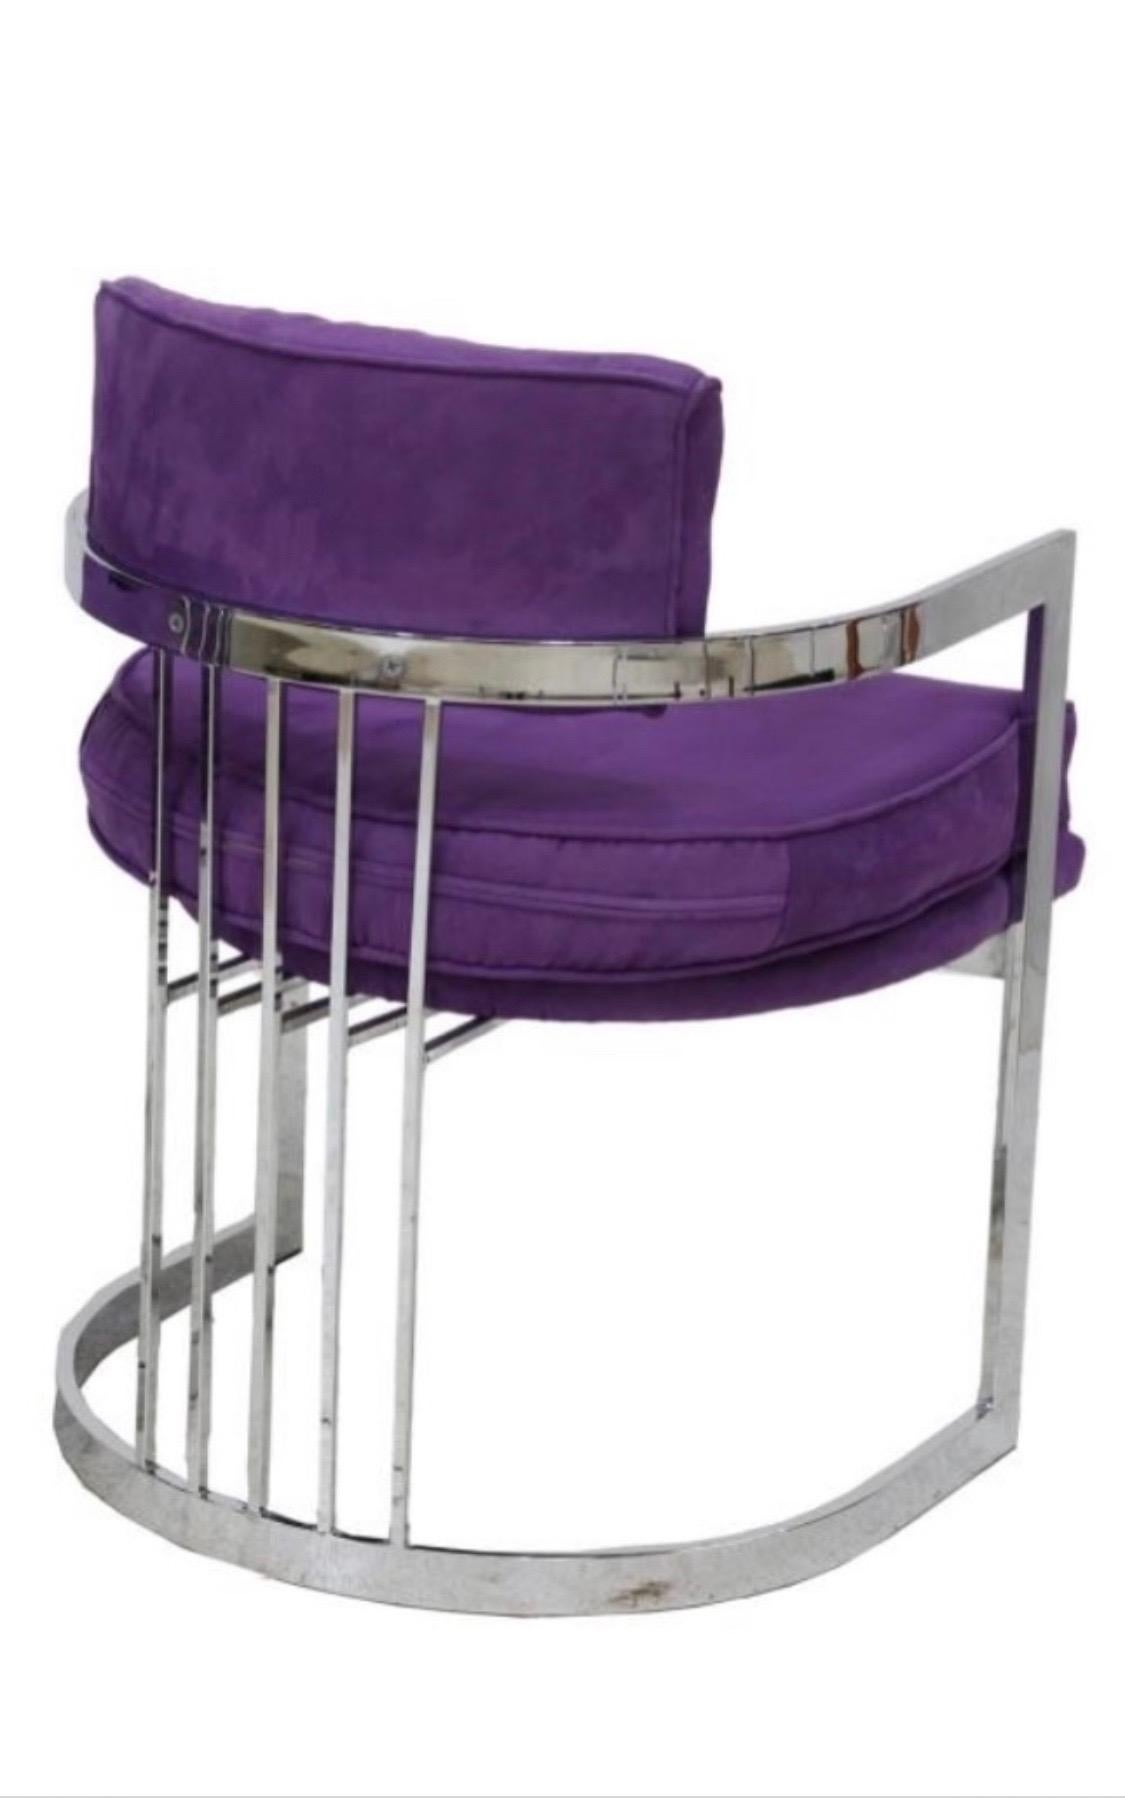 2 Set’s of Milo Baughman for Thayer Coggin Barrel back modernist Chairs. 
Chromed steel frame with an ultra suede purple upholstery.